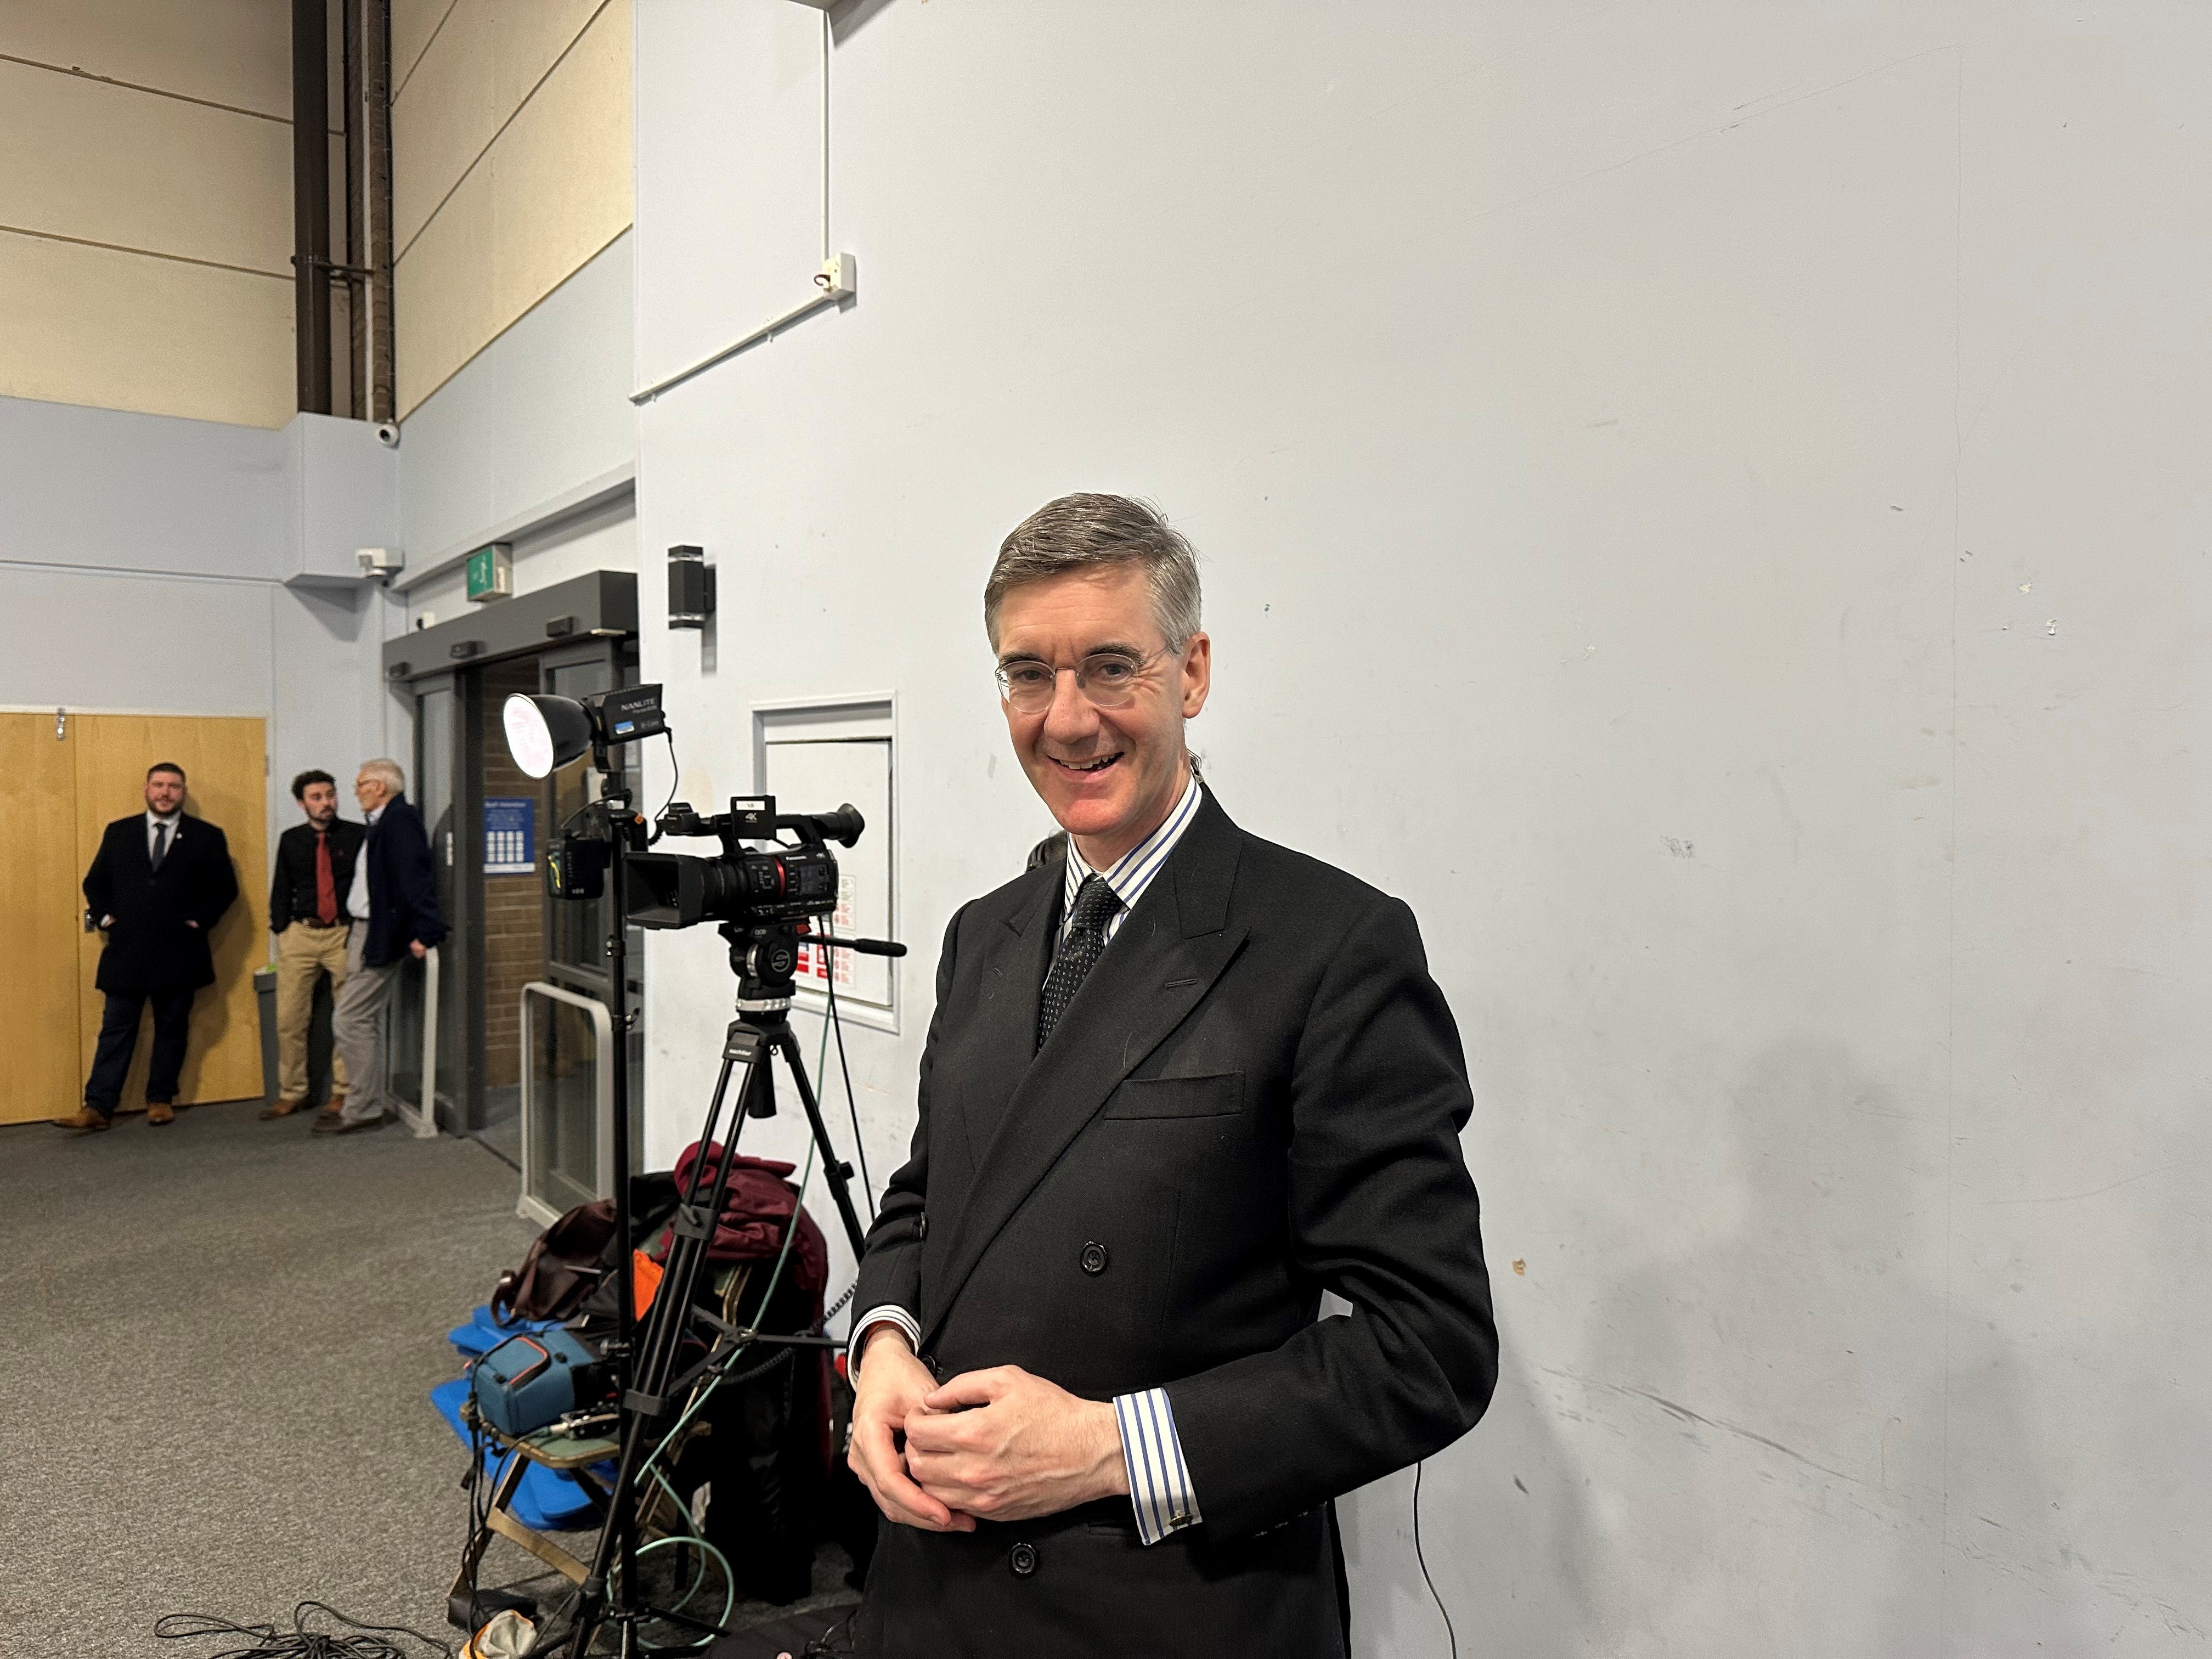 Jacob Rees-Moggs has arrived at the Kingswood by-election